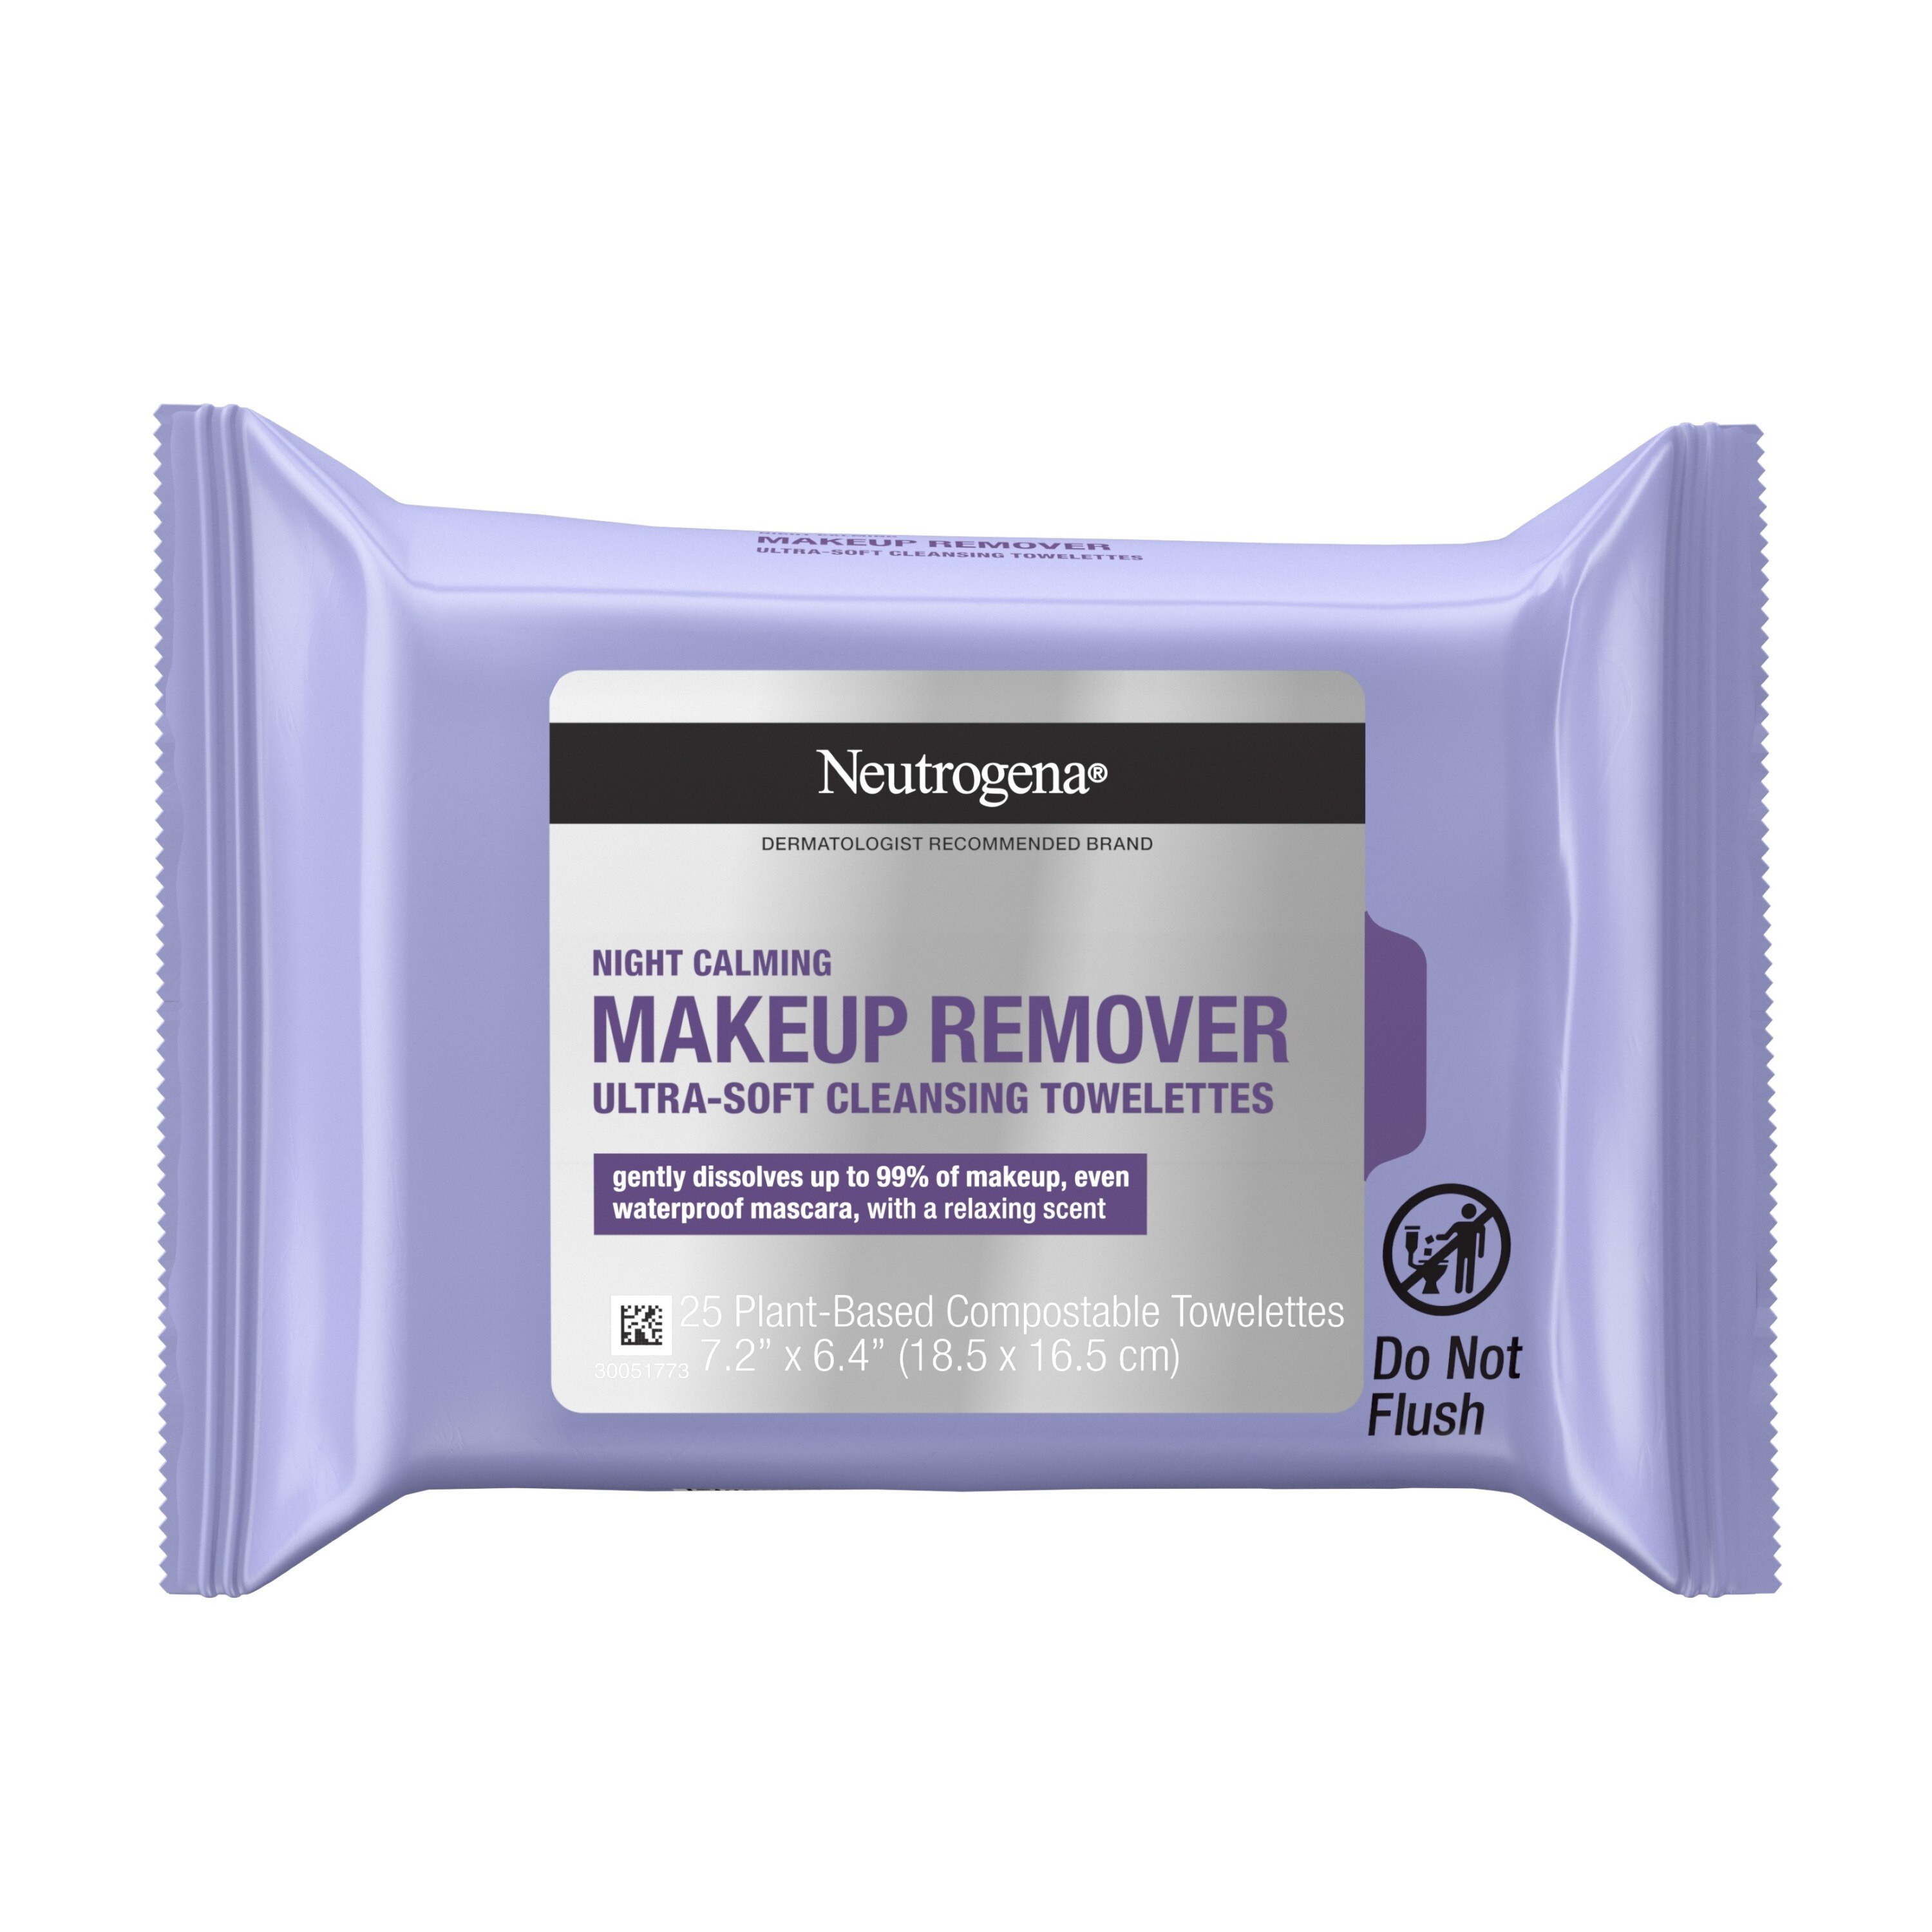 Neutrogena Makeup Remover Cleansing Towelettes Night Calming, 25/Pack